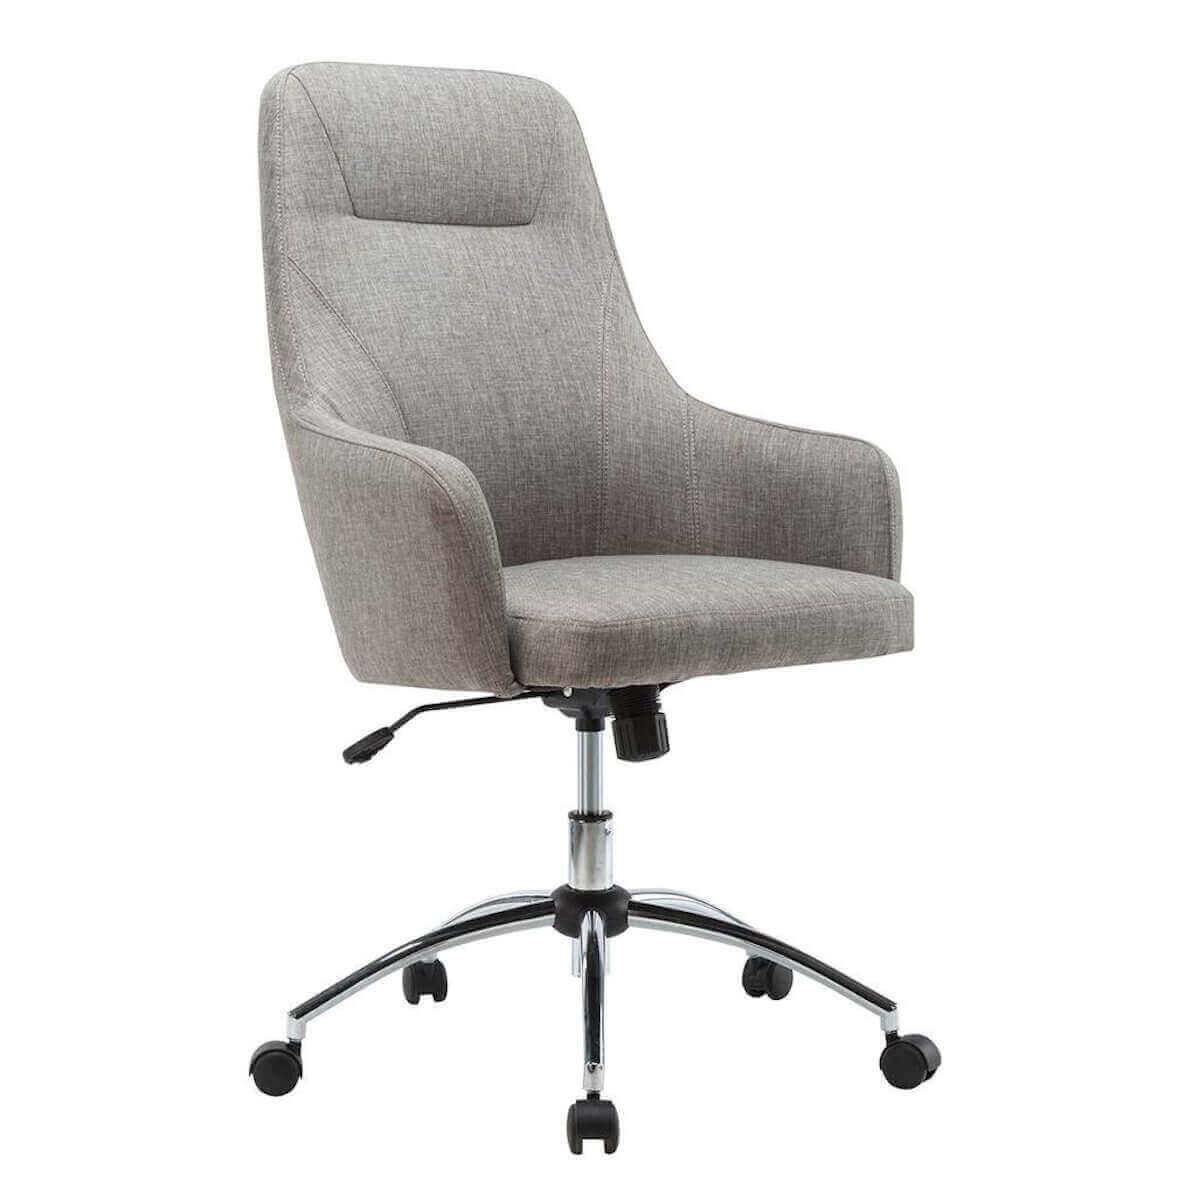 Techni Mobili Comfy Height Adjustable Rolling Office Desk Chair with Wheels RTA-1005-GRY Angle